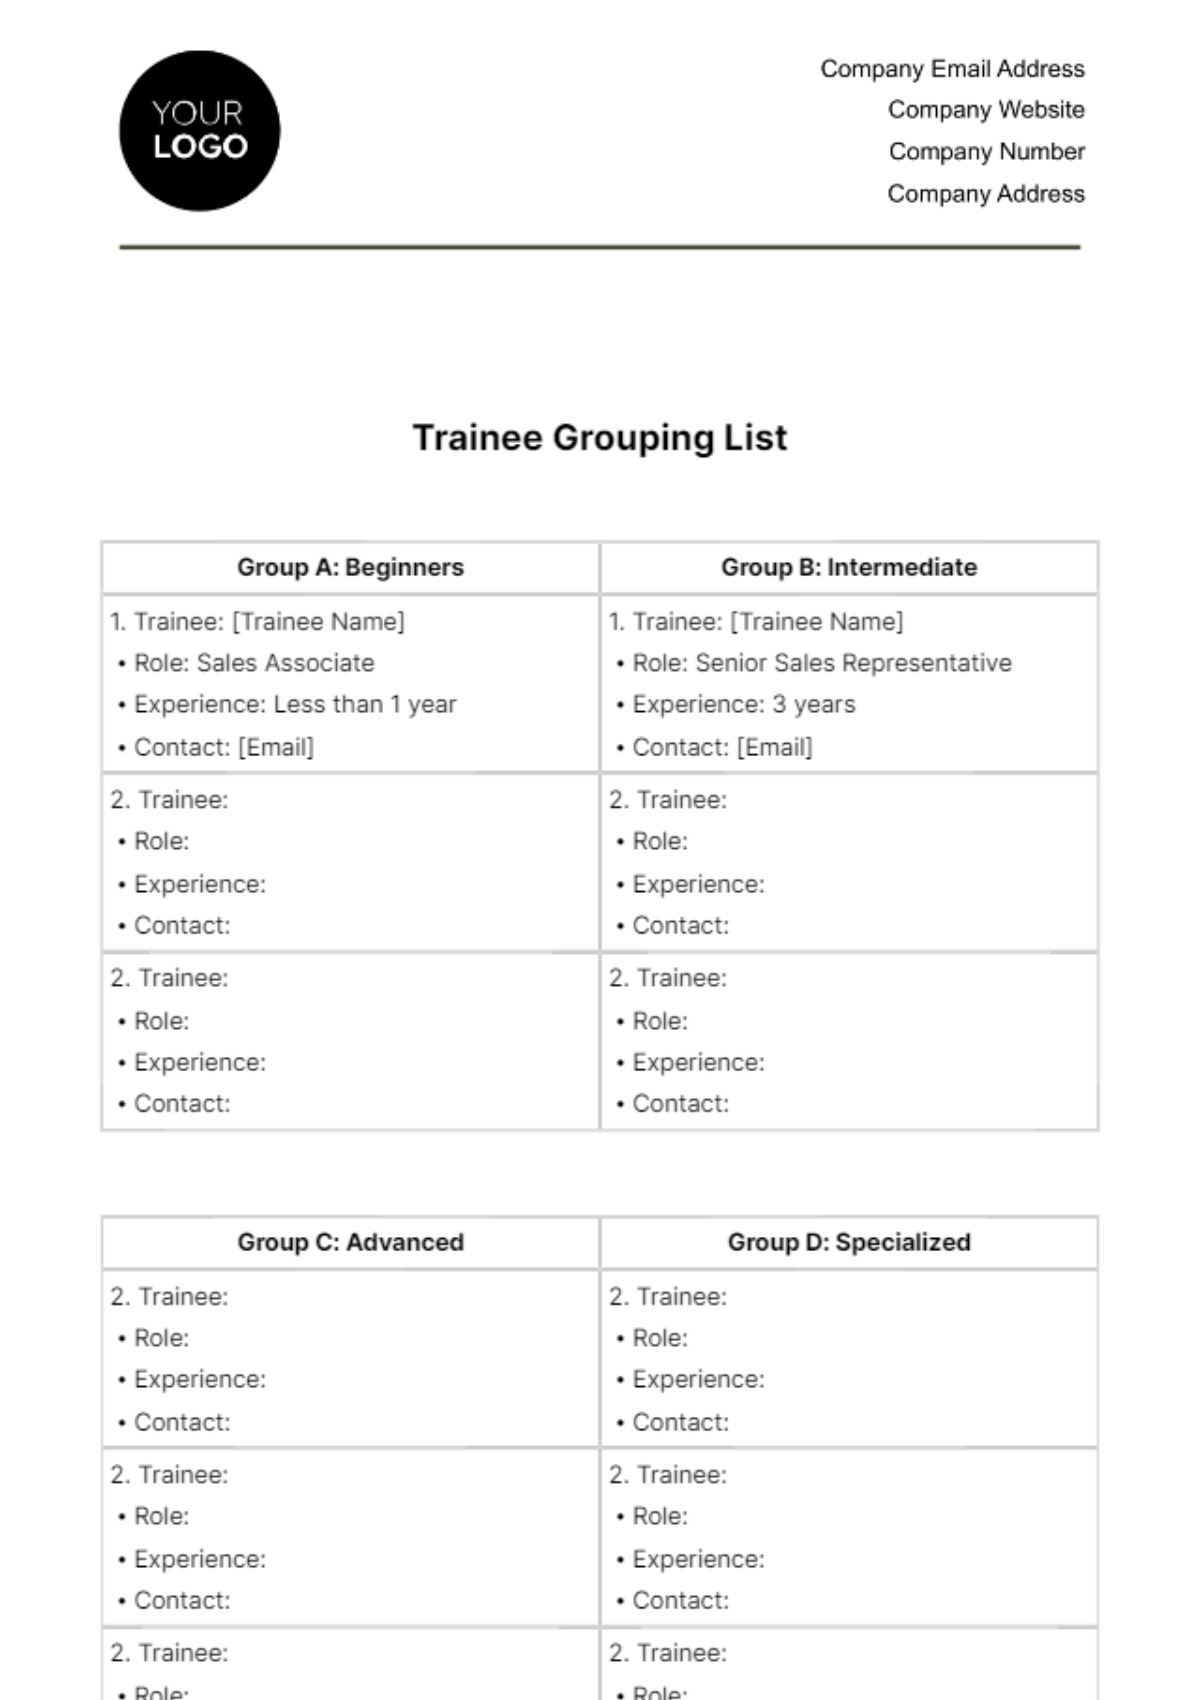 Free Trainee Grouping List HR Template